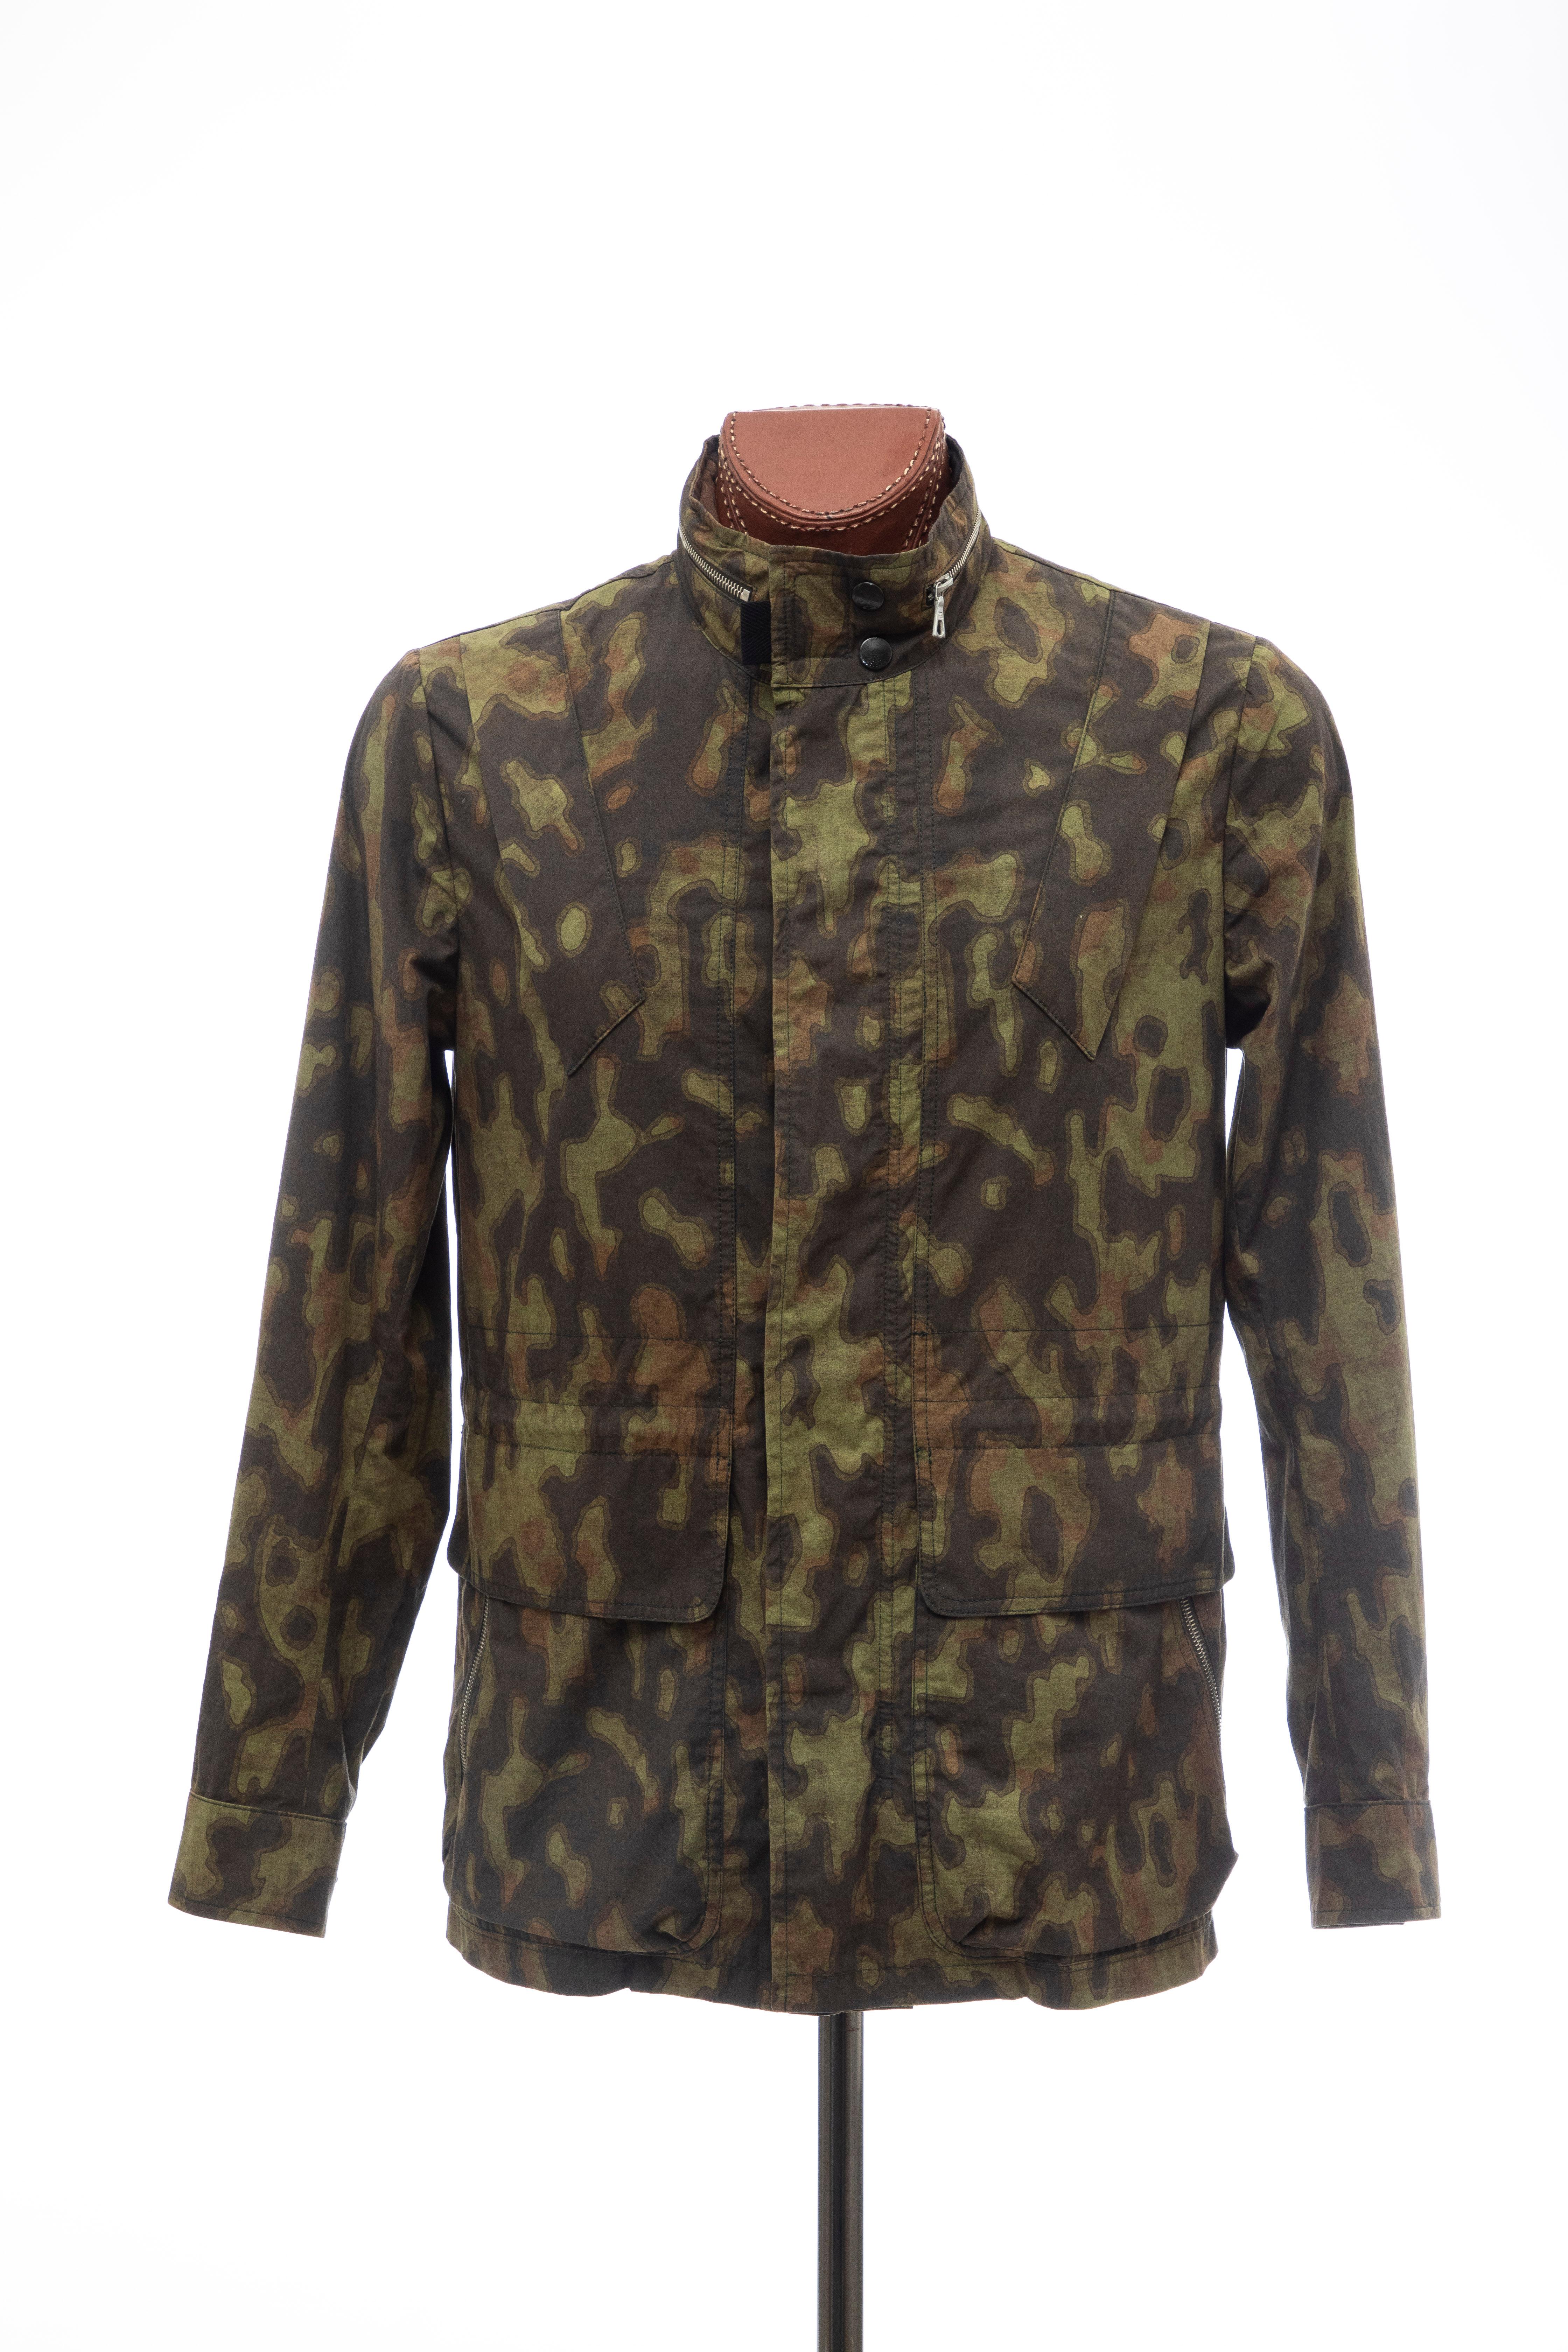 Dries Van Noten, Spring 2013 men's cotton zip front camouflage jacket, four zip front pockets, velcro and snap neck closure with zip concealed camouflage nylon hood.

EU, 50

Chest: 43, Waist: 43, Length: 30, Shoulder: 18.5, Sleeve: 26